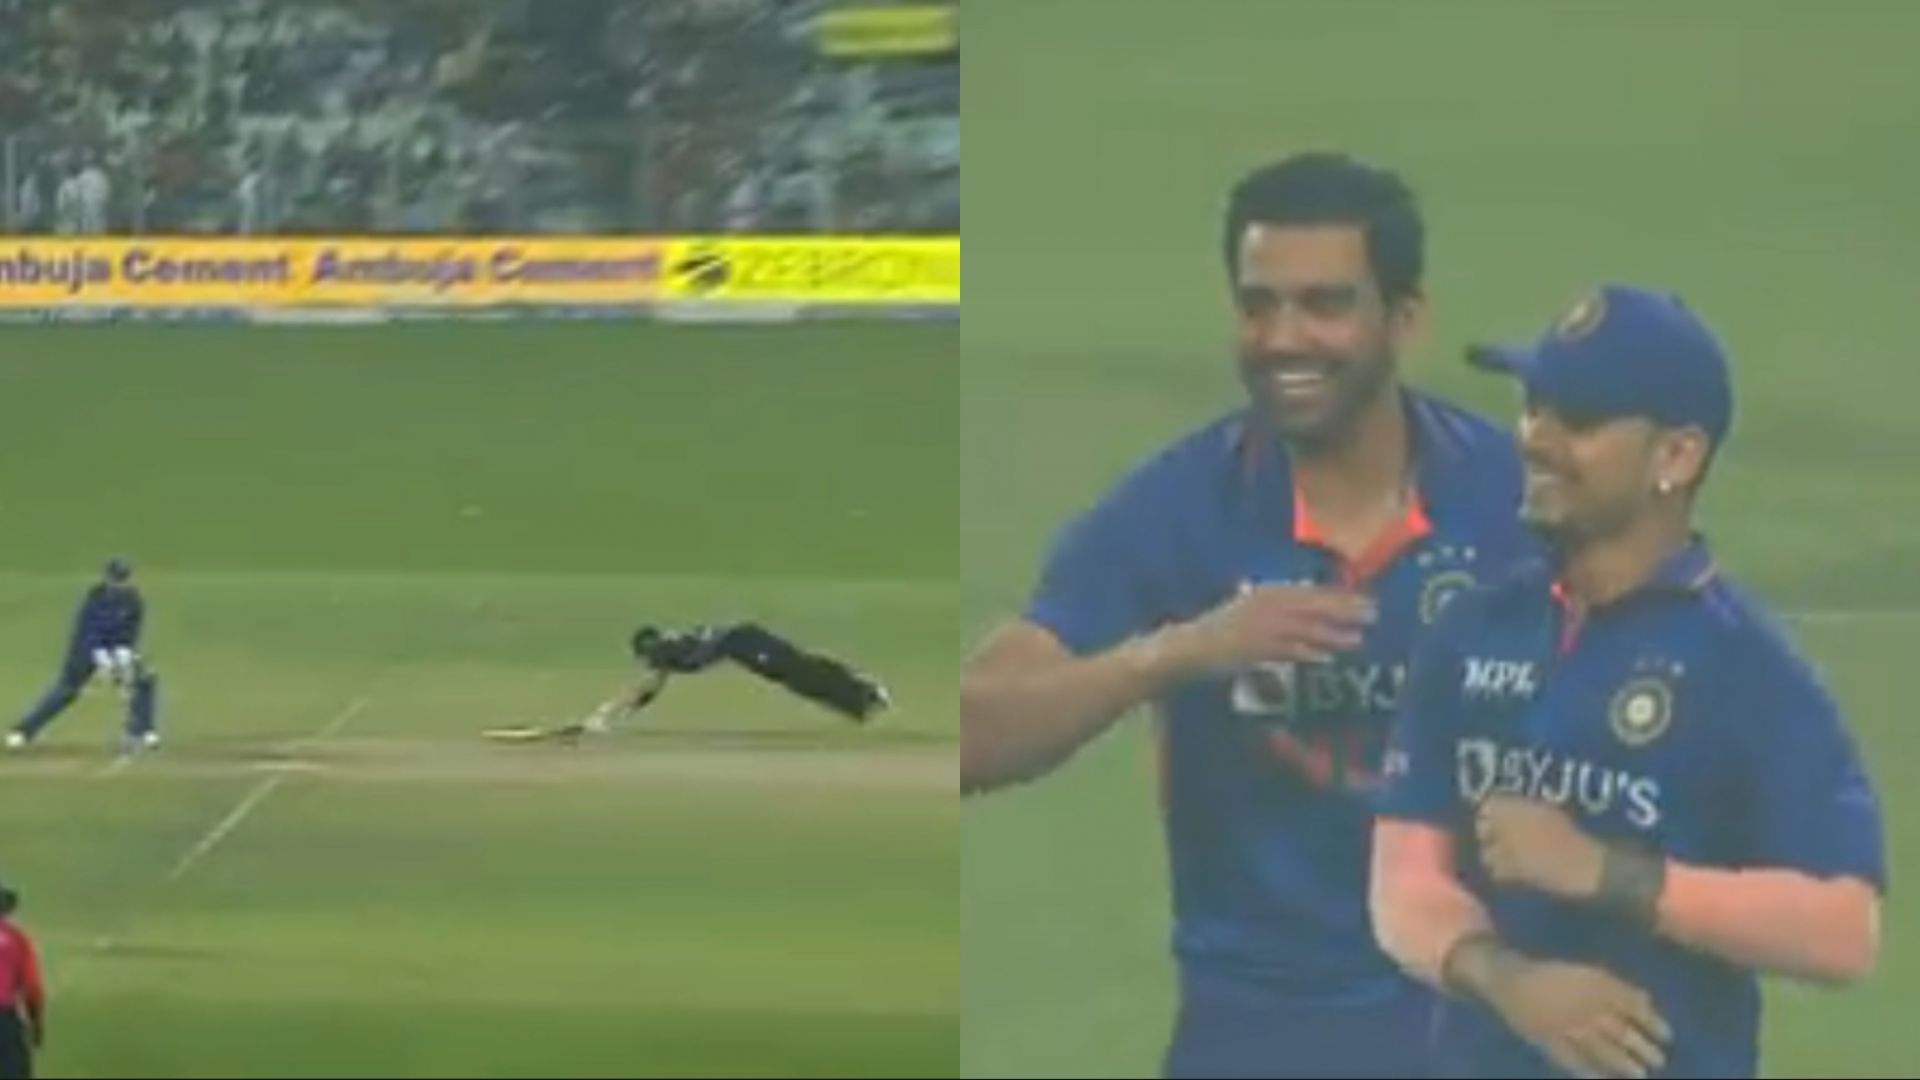 Ishan Kishan was involved in two run-outs during the 3rd T20I of the India vs New Zealand series